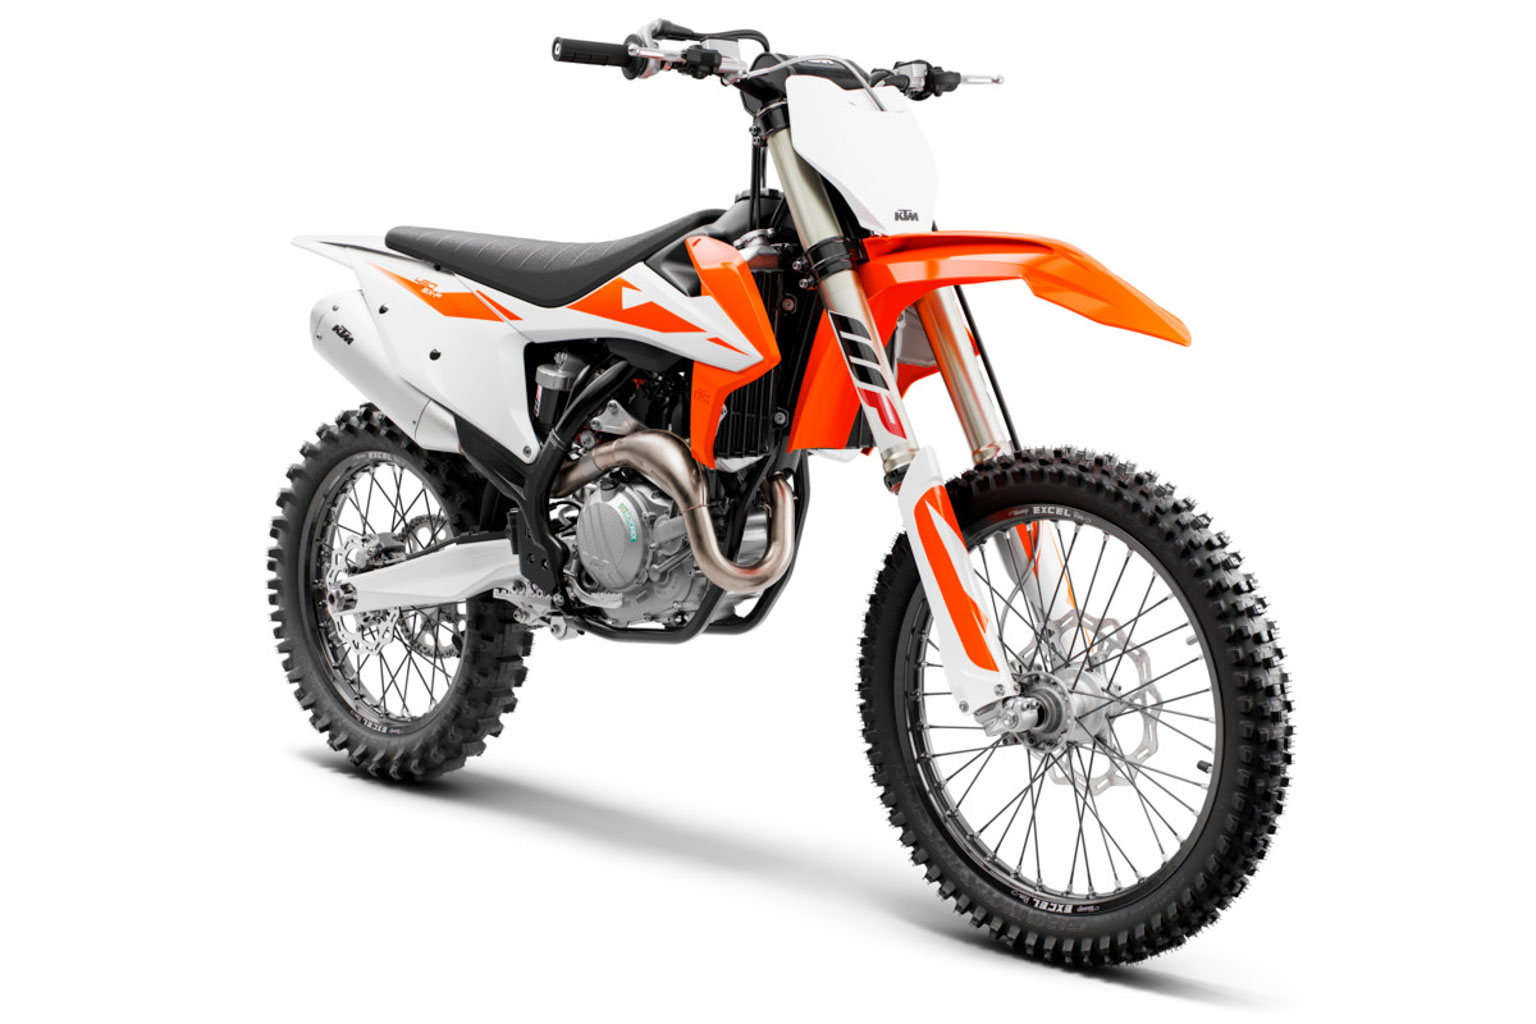 KTM's 2019 fourstrokes are lighter and faster MotoHead